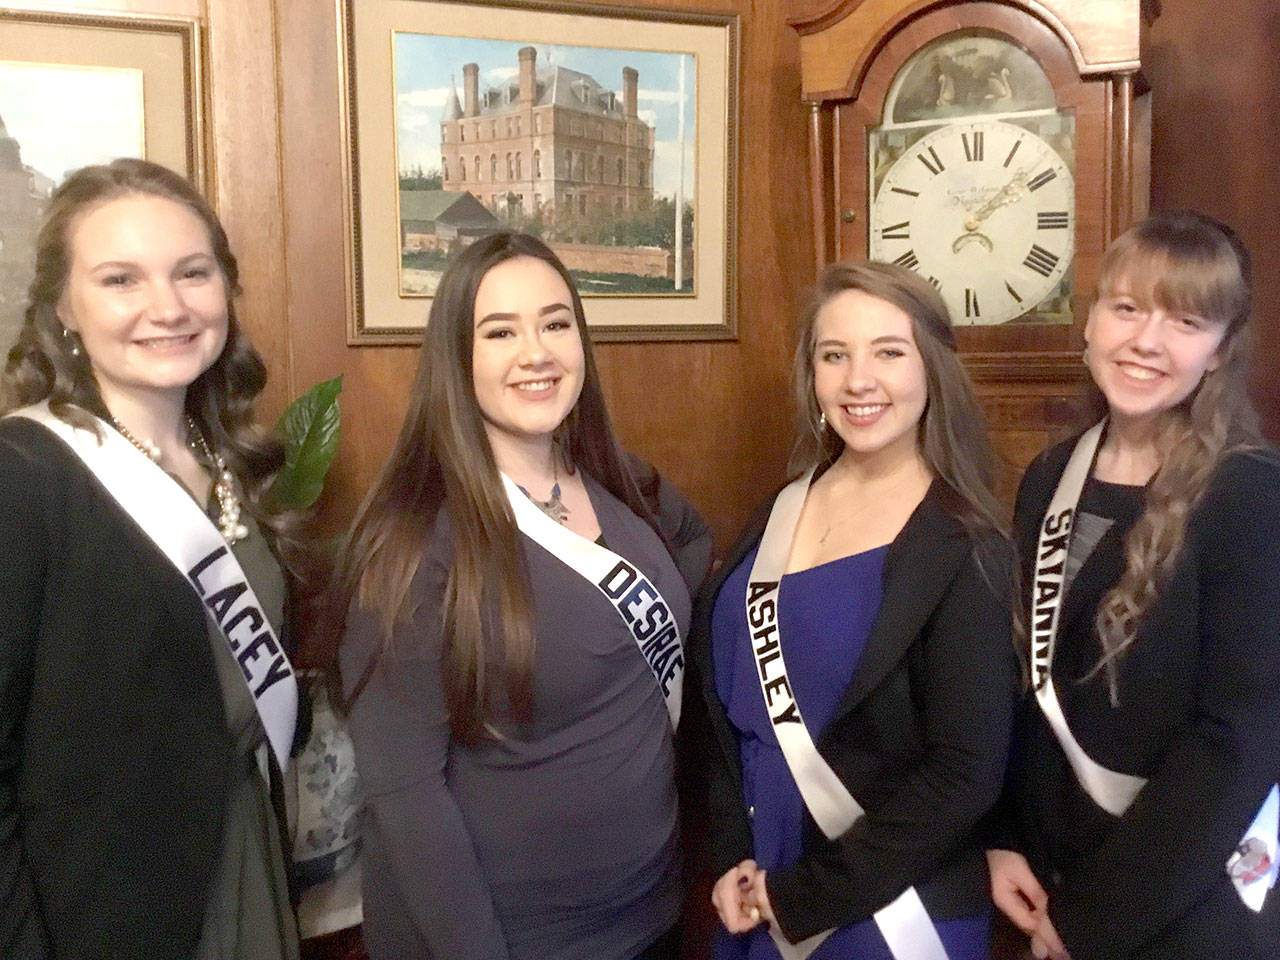 Donning their sashes for the first time are 2018 Rhododendron Festival royalty candidates Lacey Bishop, Desirae Kudronowicz, Ashley Rosser and Skyanna Iardella. (Jeannie McMacken/for Peninsula Daily News)